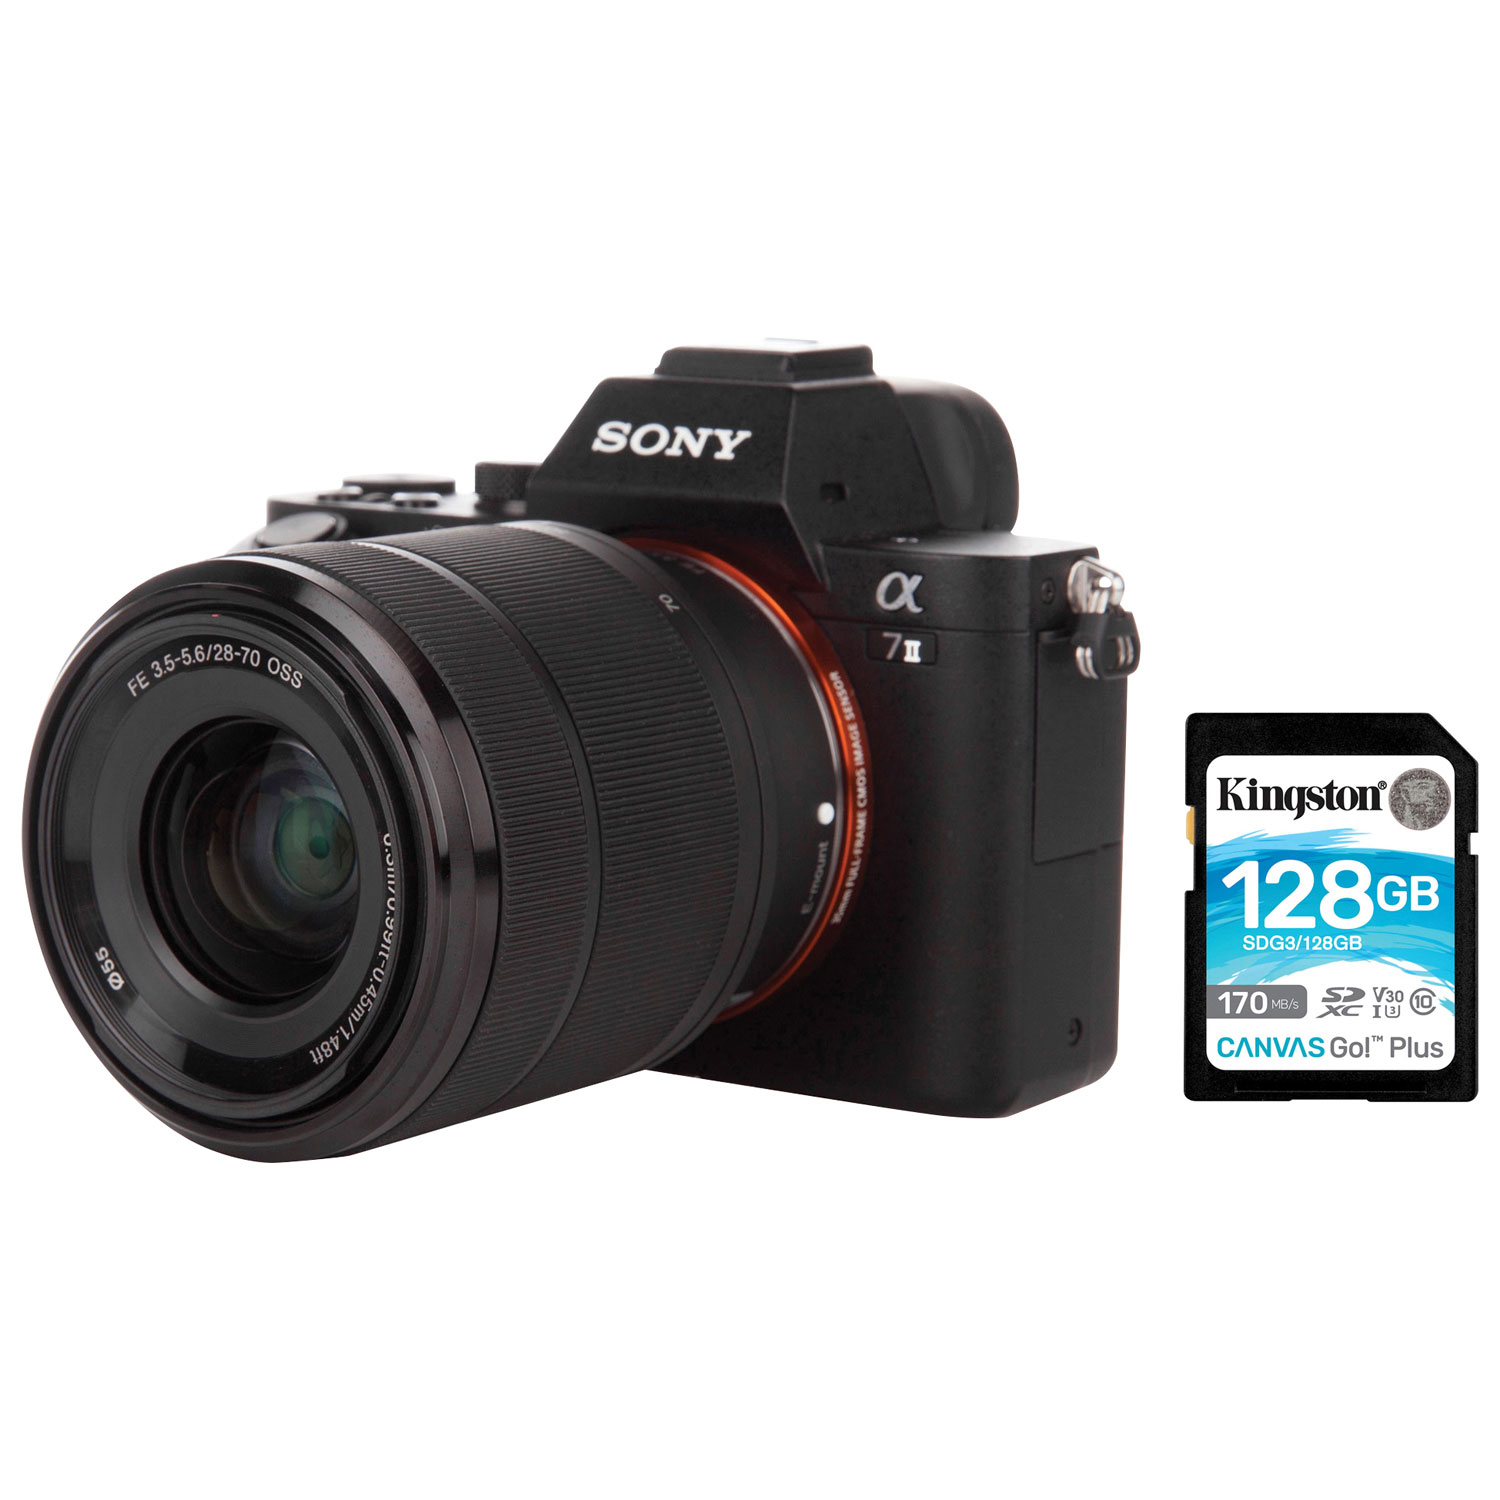 Sony Alpha a7 II Full-Frame Mirrorless Camera with FE 28-70mm Lens Kit & 128GB Memory Card